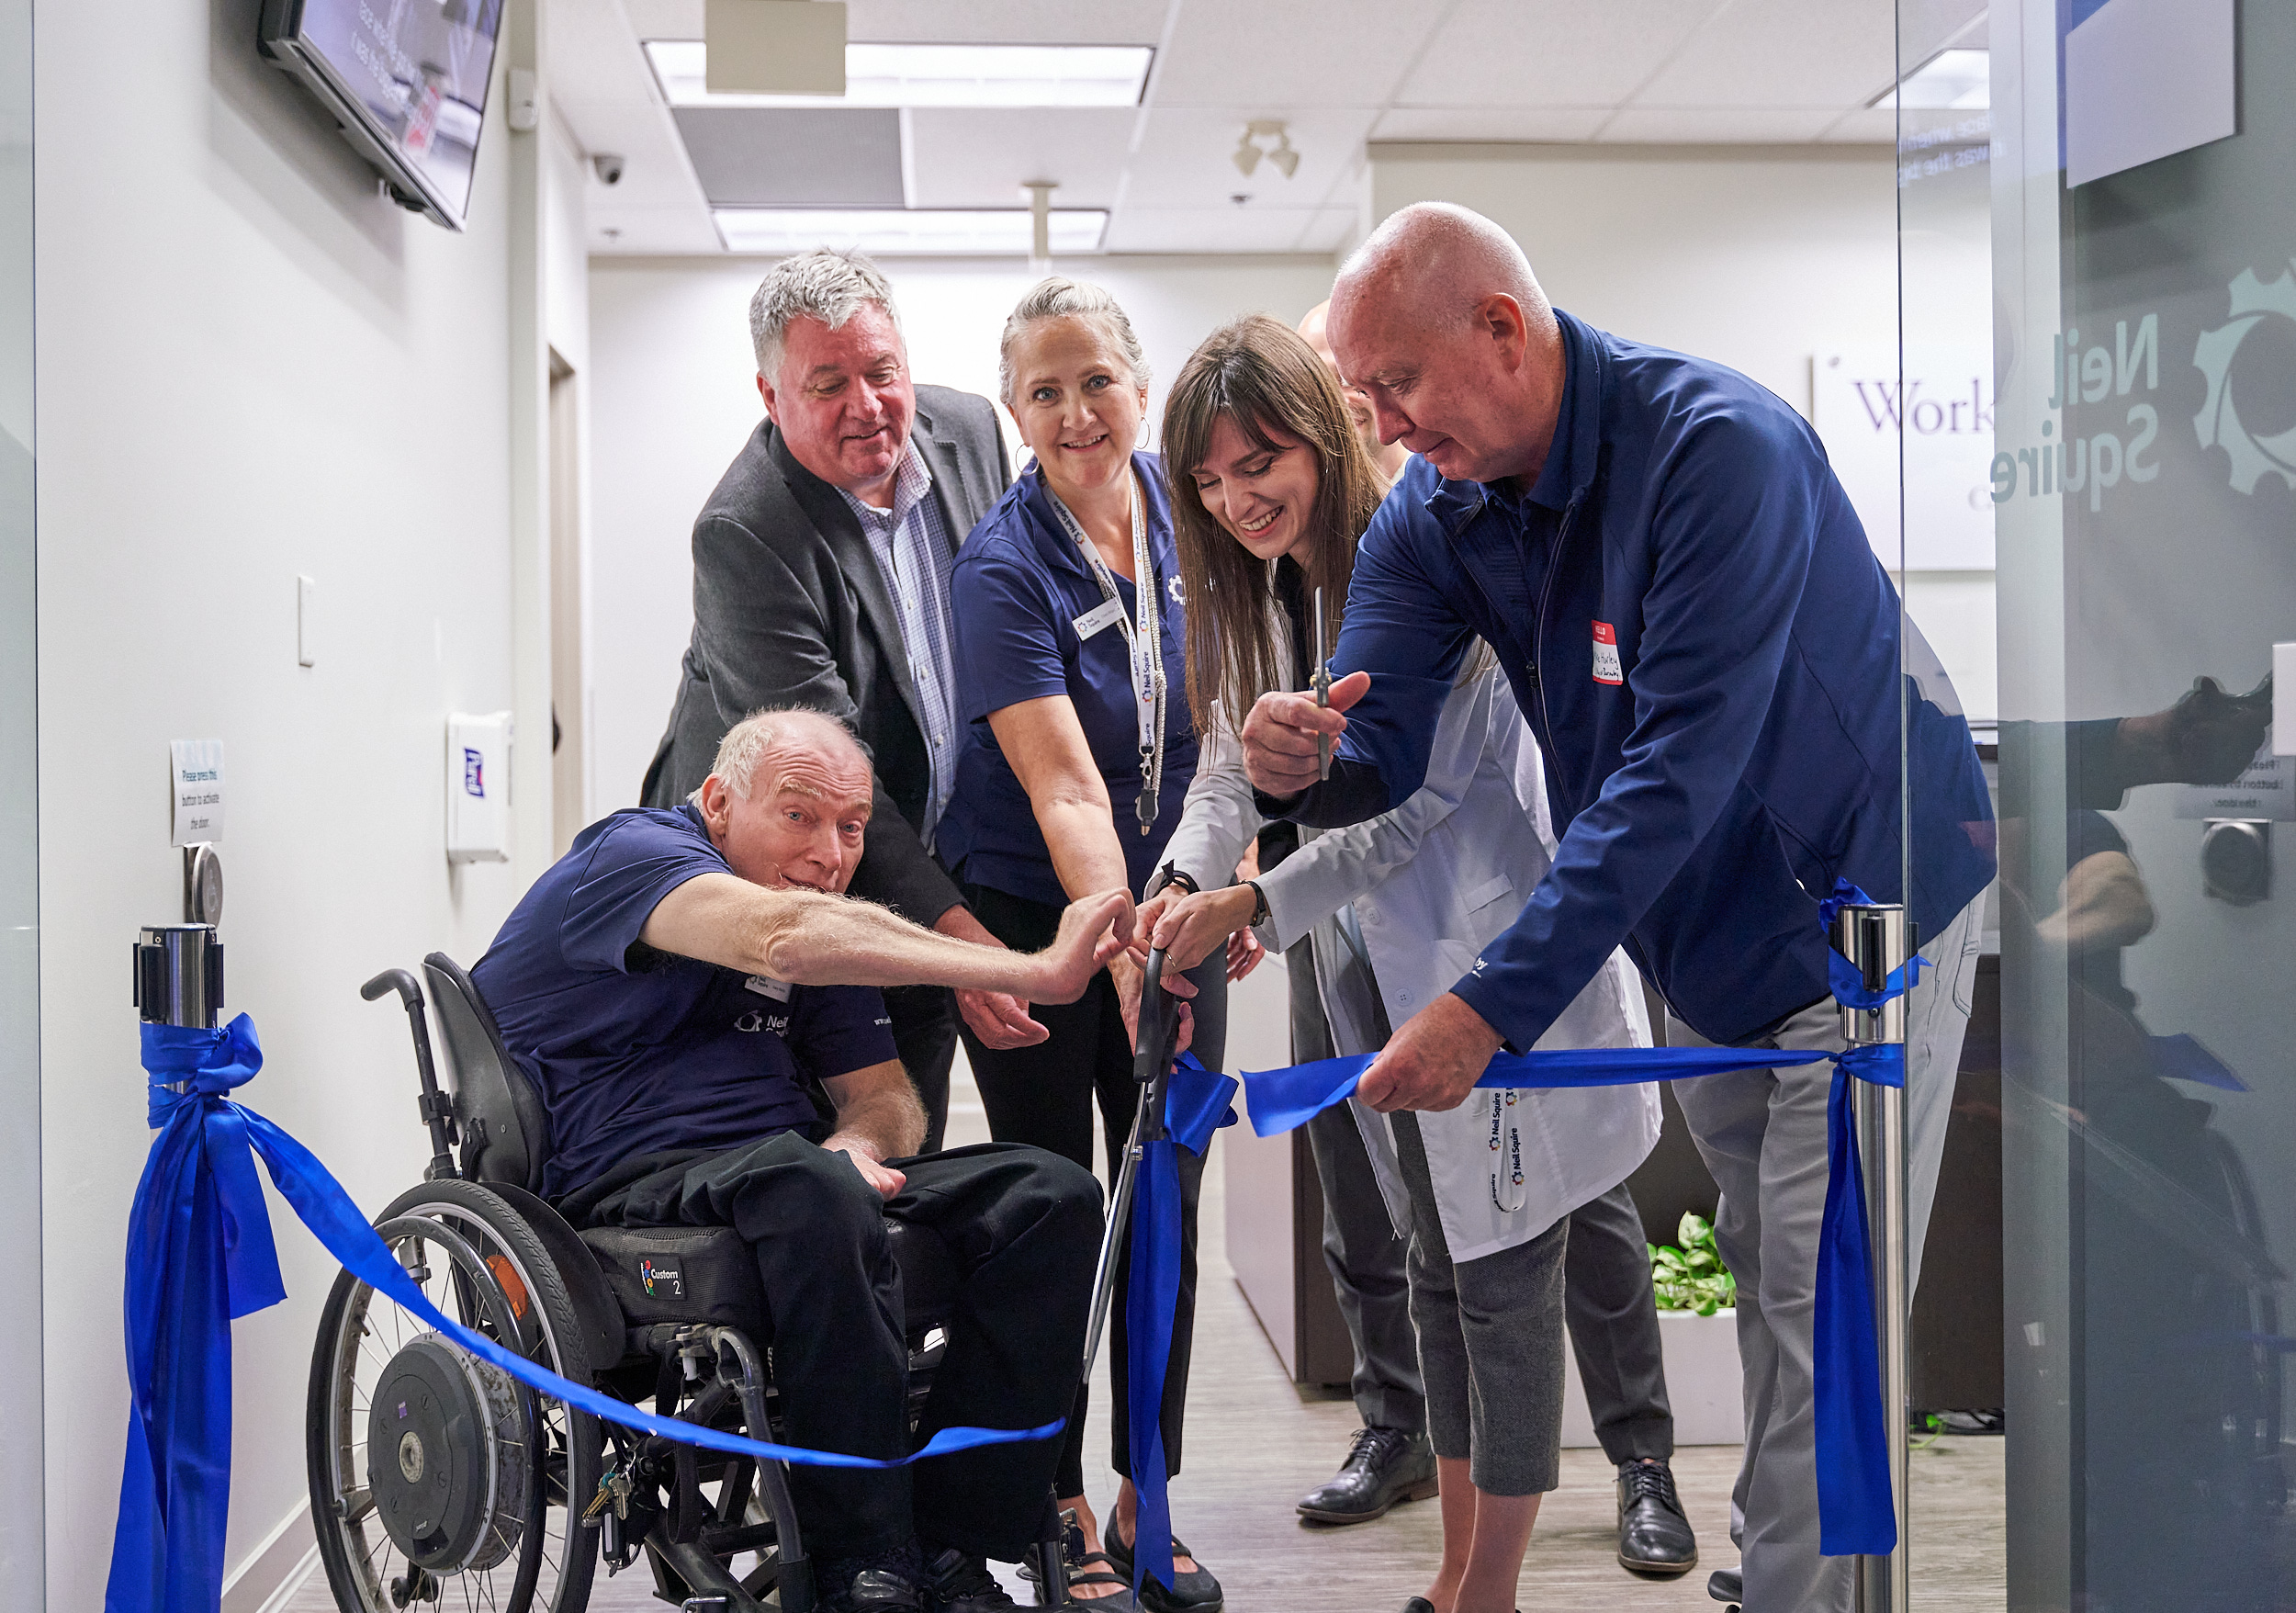 Executive Director Gary Birch, Paul Holden, Hearing Solutions receptionist Cheri, Hearing Solutions audiologist Heather, and Mayor Mike Hurley cut the ribbon